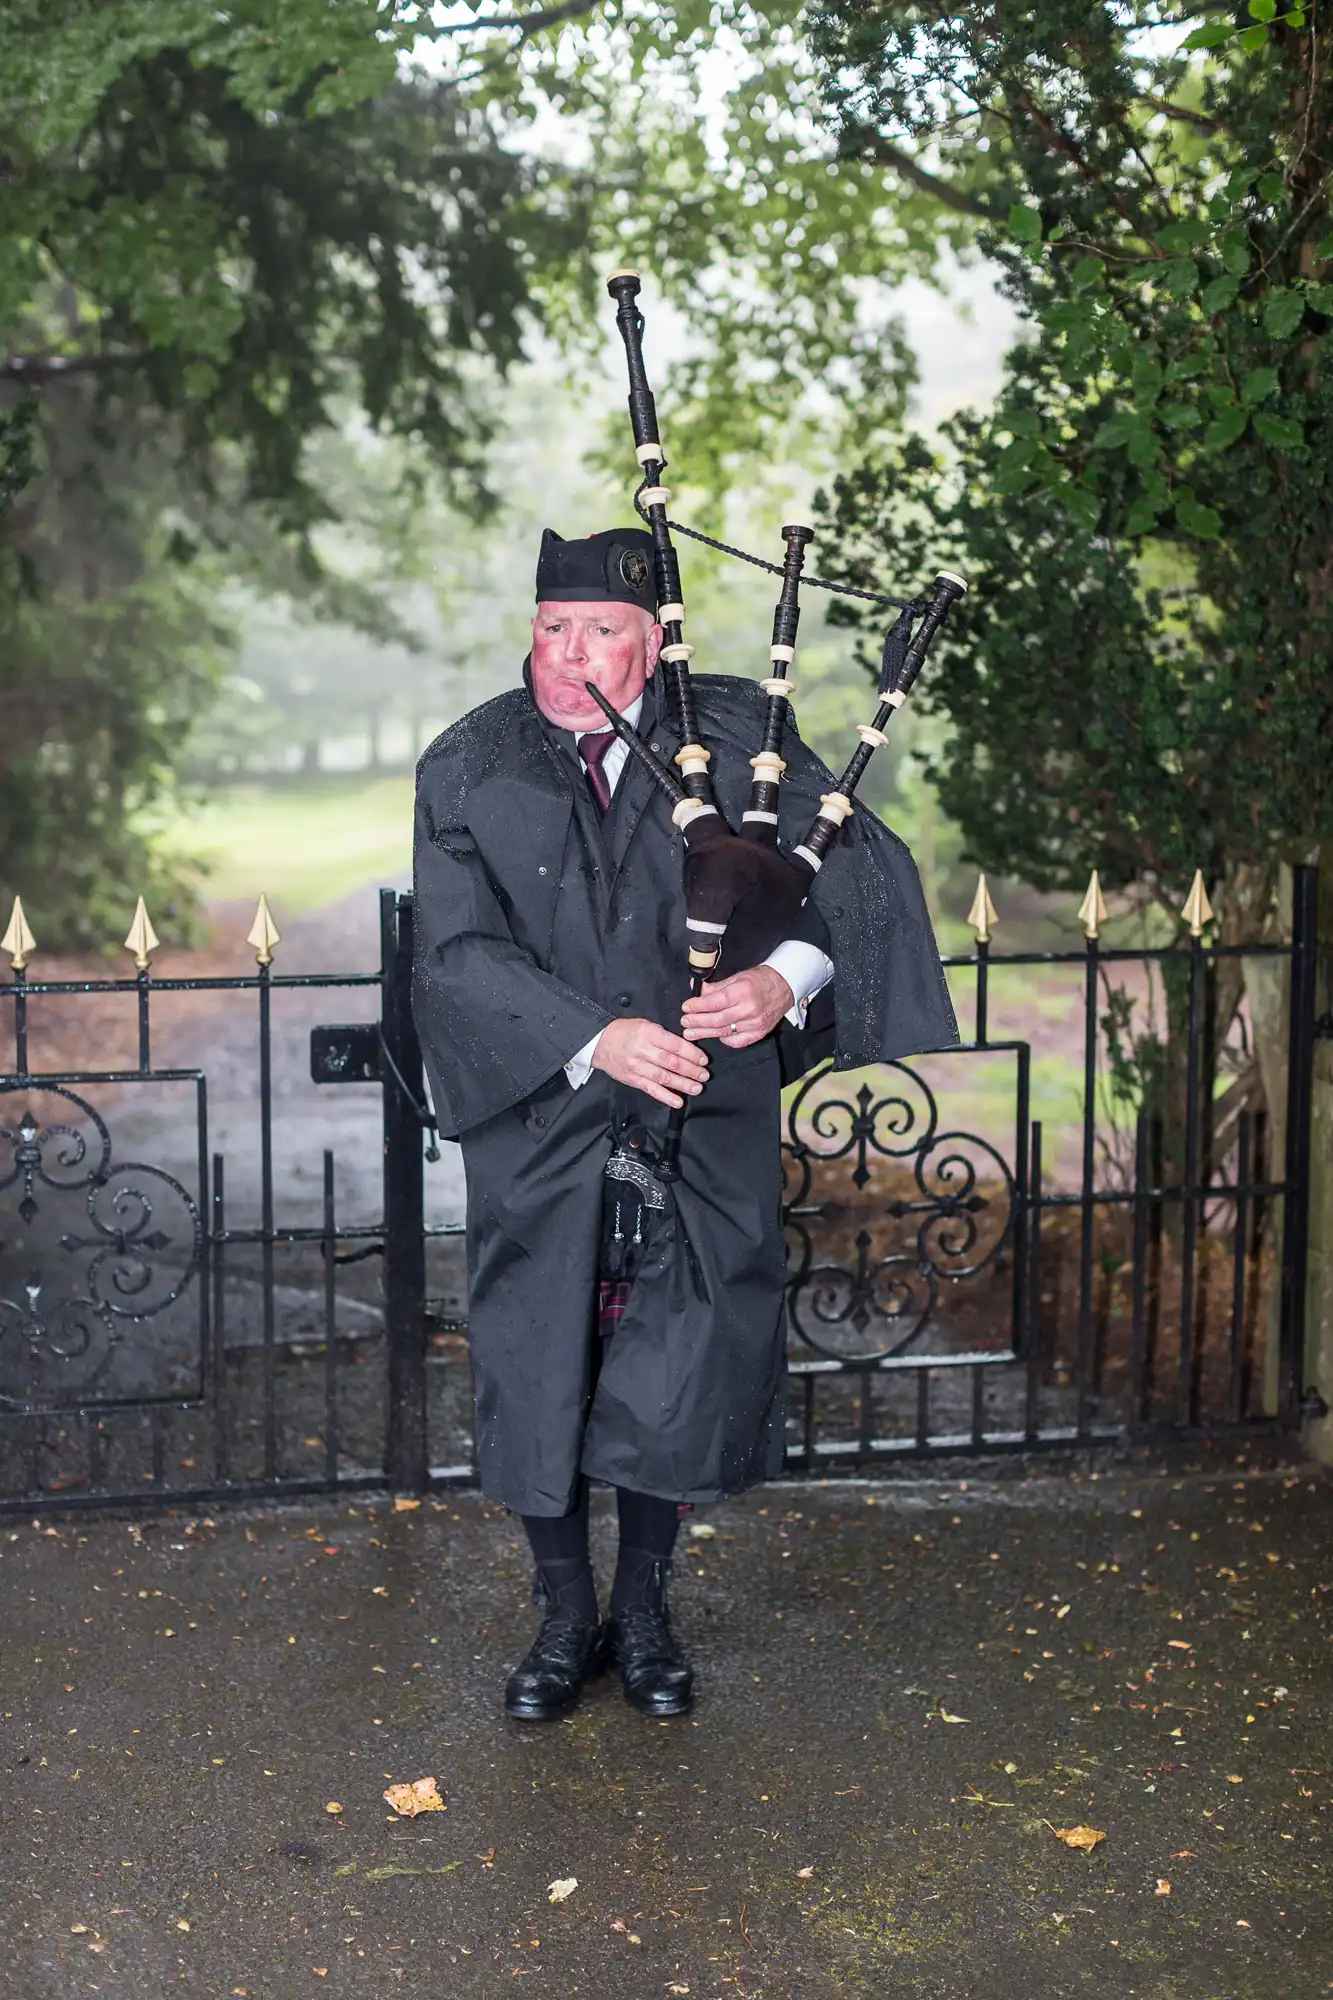 An elderly man in traditional scottish attire playing bagpipes in the rain near a gate.